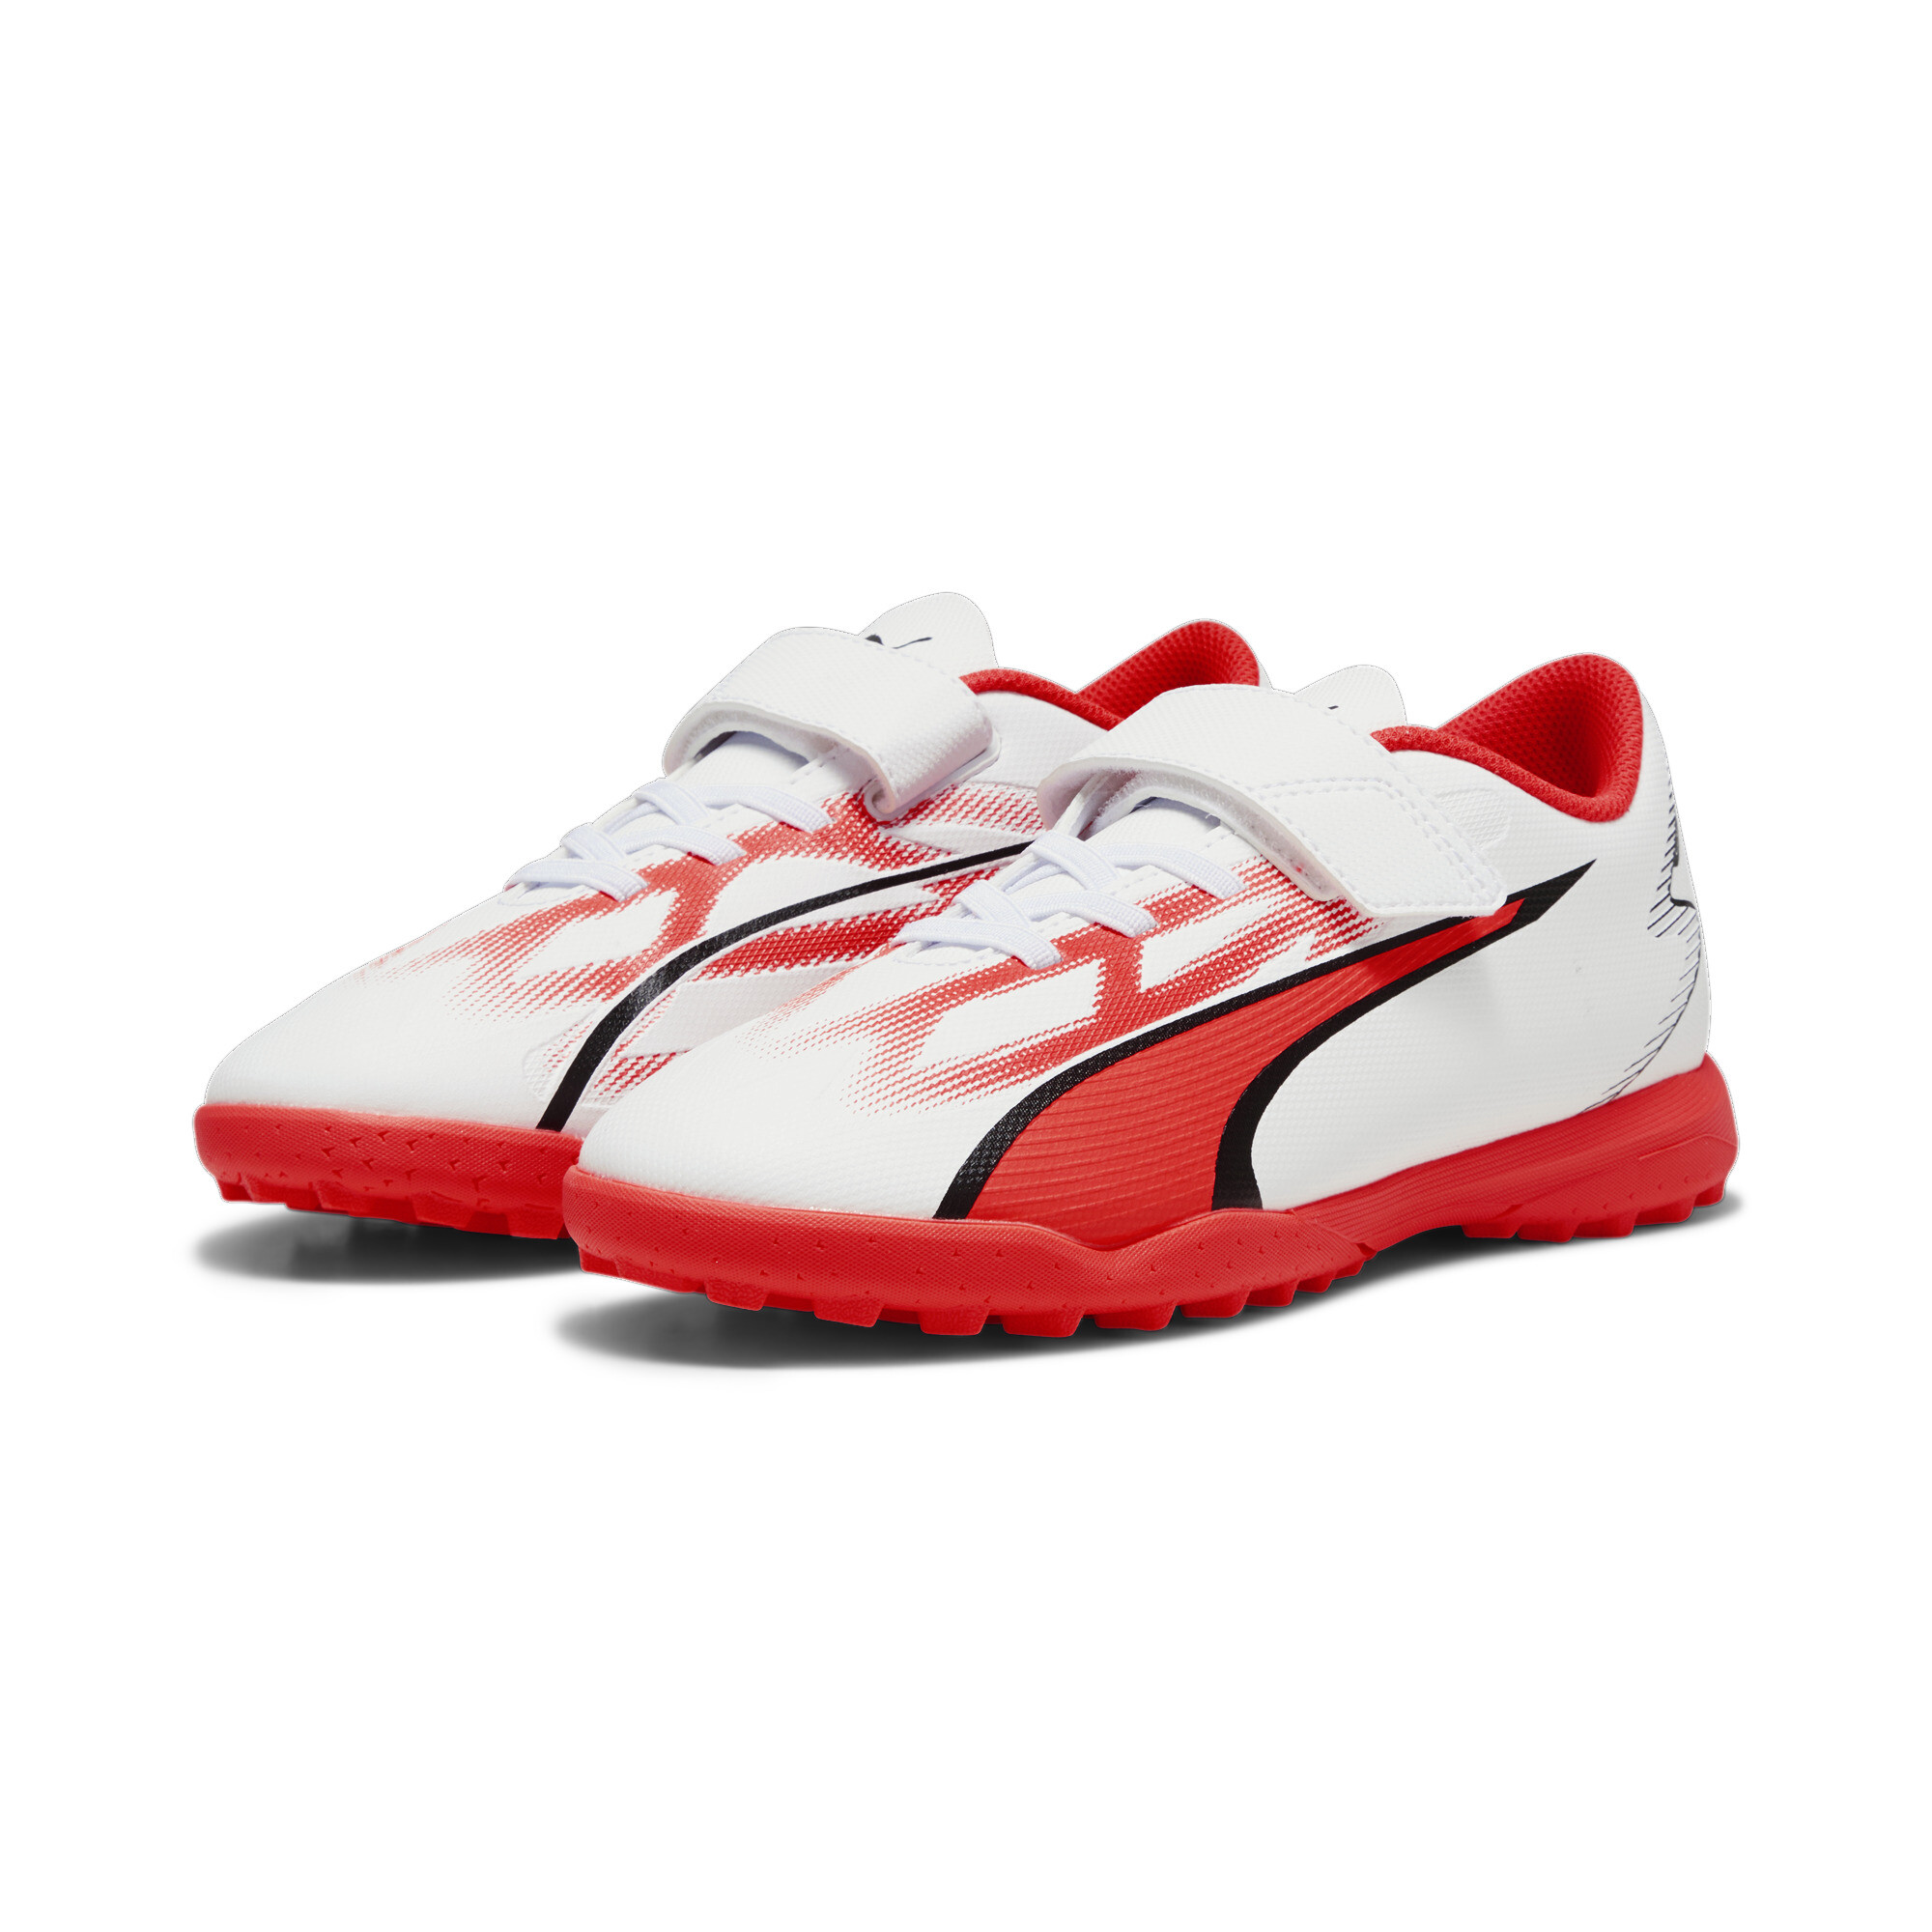 PUMA ULTRA PLAY TT Youth Football Boots In White, Size EU 36